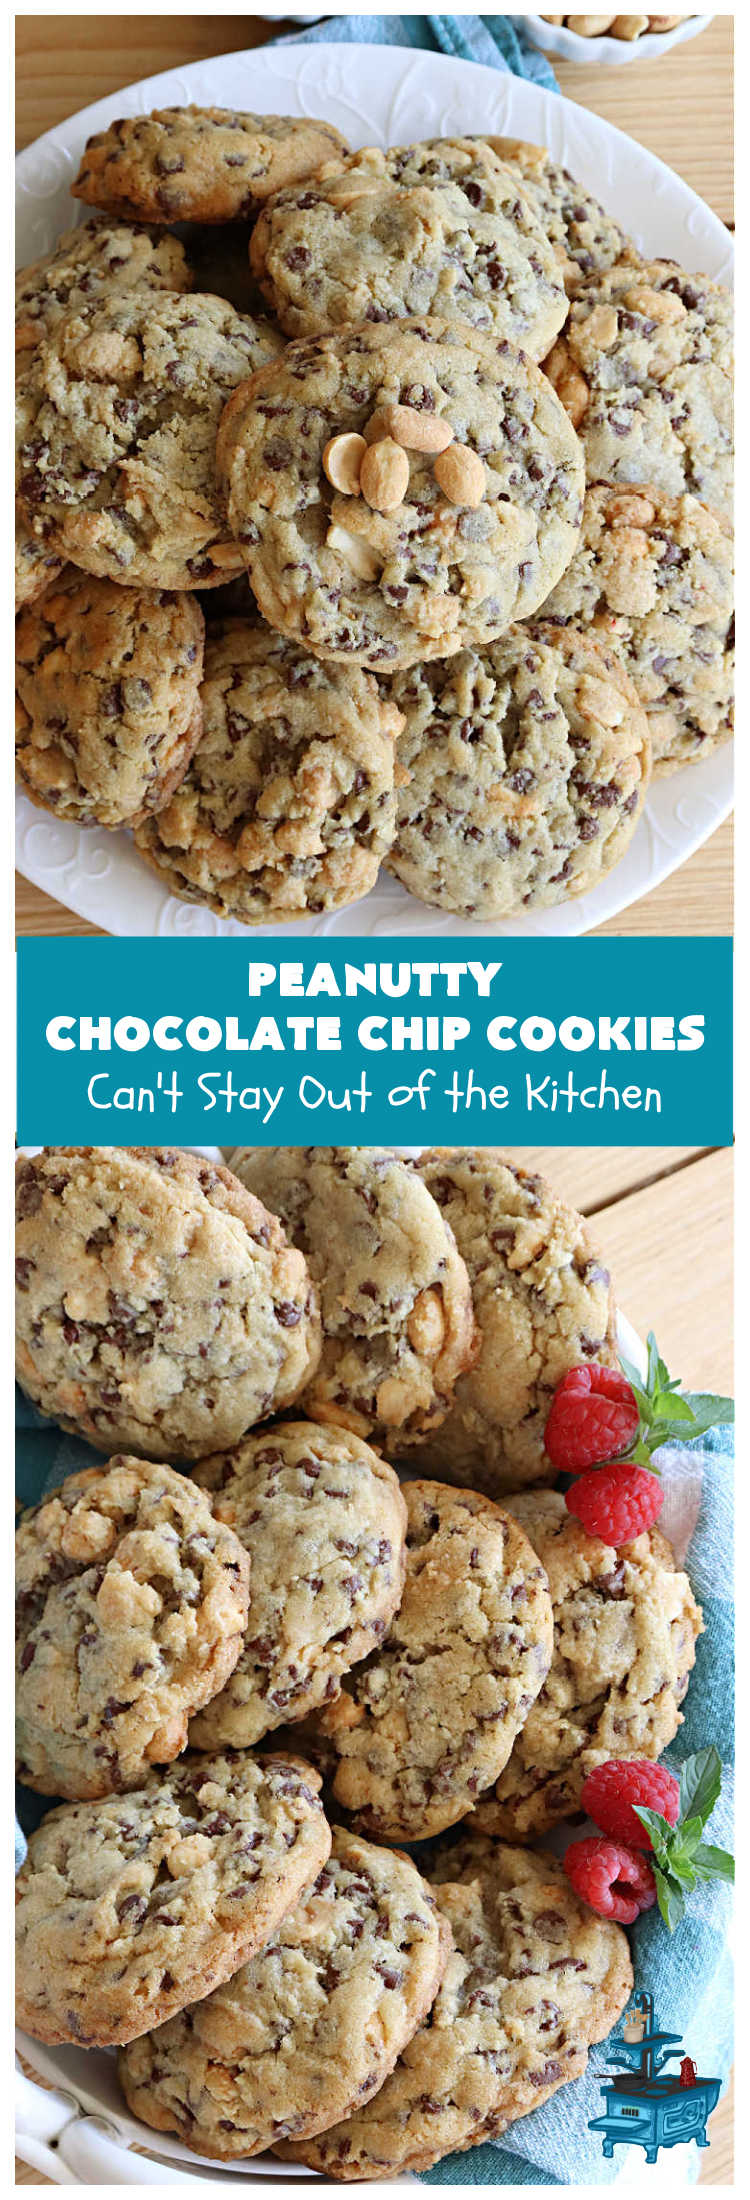 Peanutty Chocolate Chip Cookies | Can't Stay Out of the Kitchen